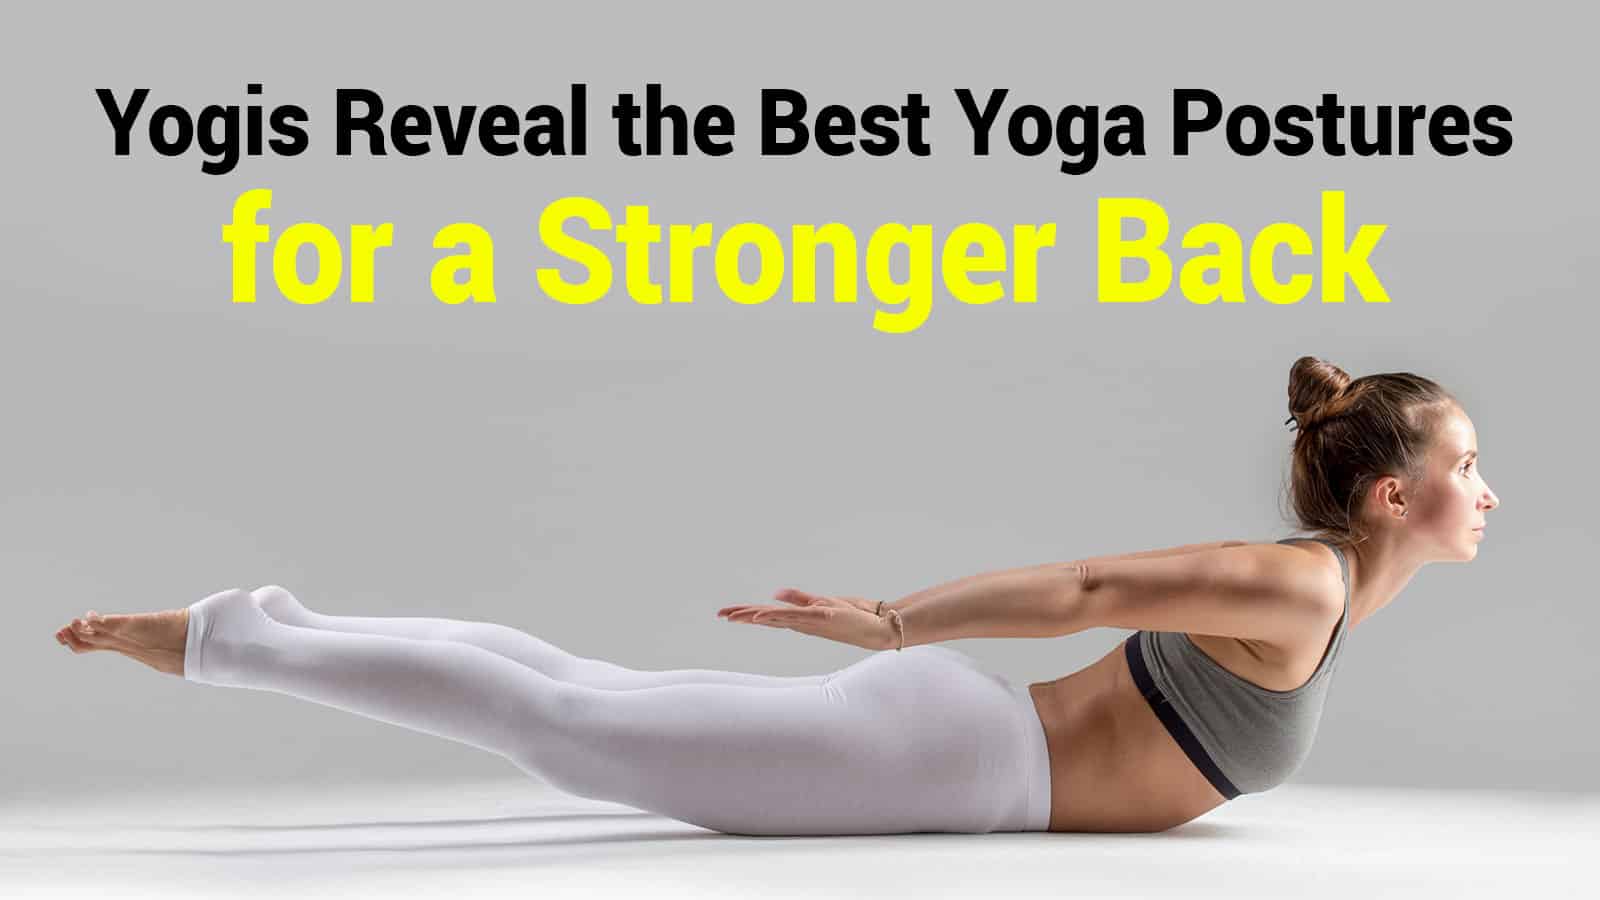 1581689263_Yogis-Reveal-the-Best-Yoga-Postures-for-a-Stronger-Back.jpg